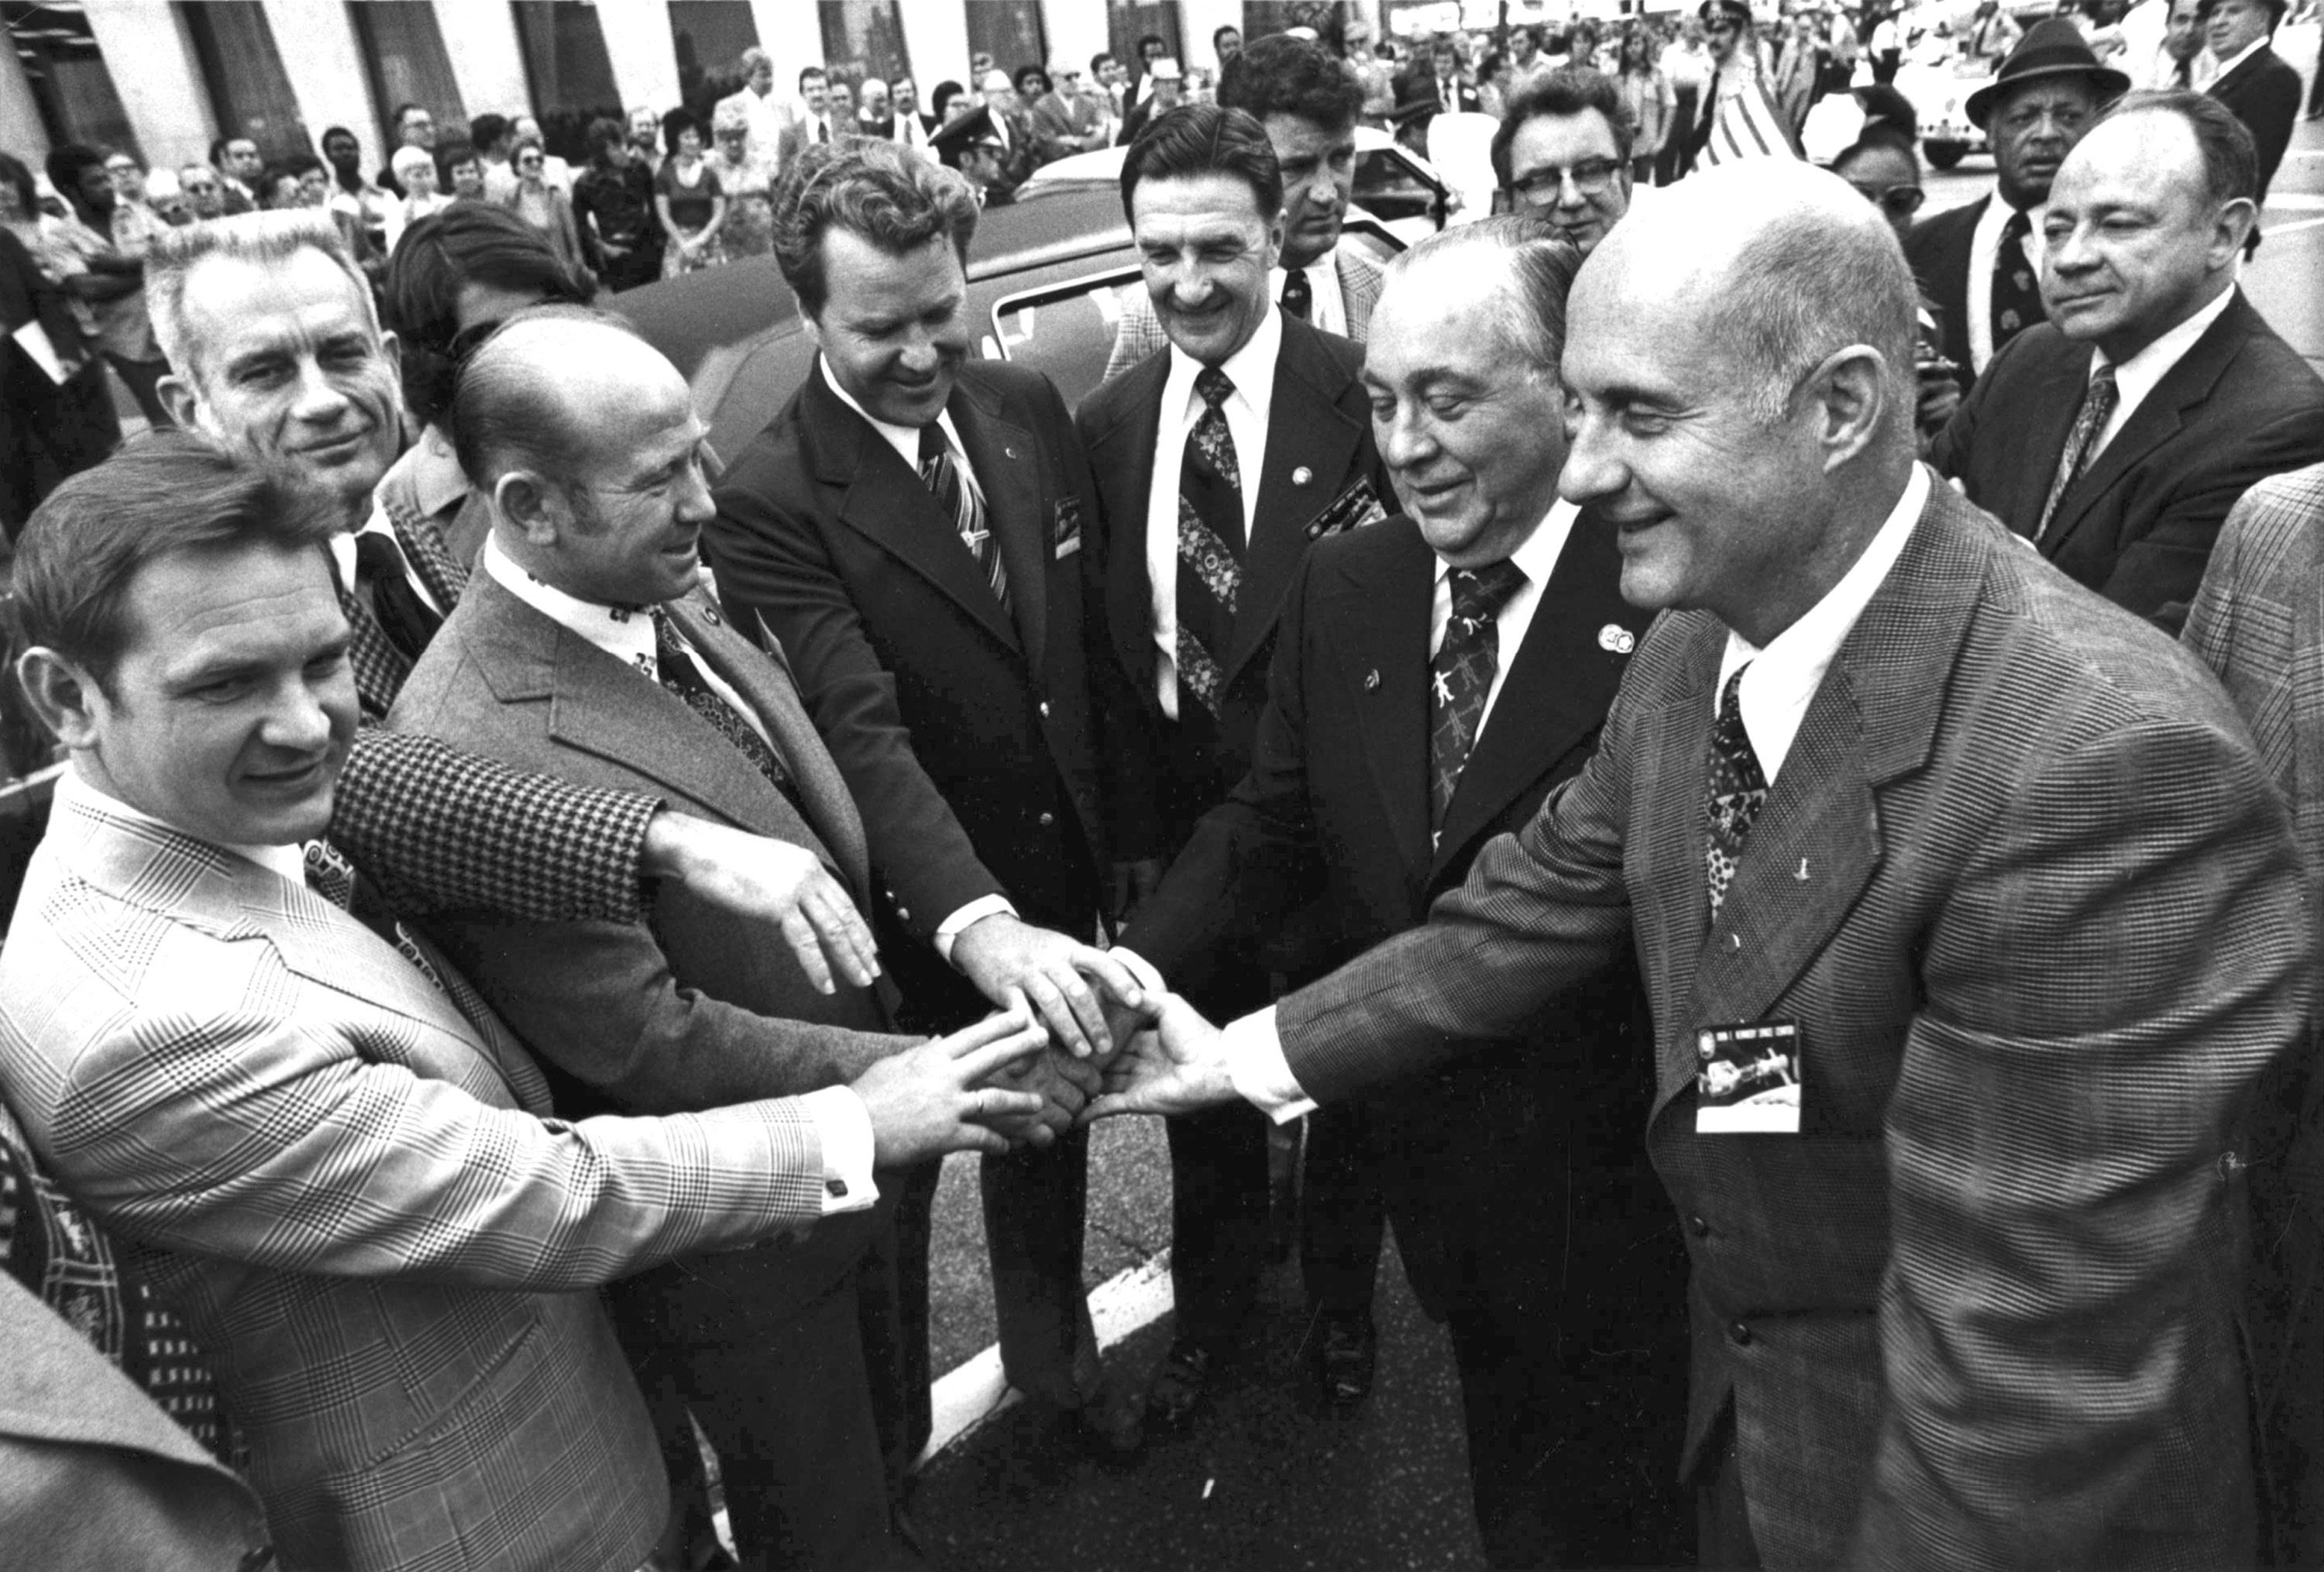 ◄ Members of the Russian and U.S. crews of the Apollo-Soyuz Test Project are honored October 1975 during a parade in October. Gen. Thomas P. Stafford, right, is joined by Chicago Mayor Richard Daly, second from right.